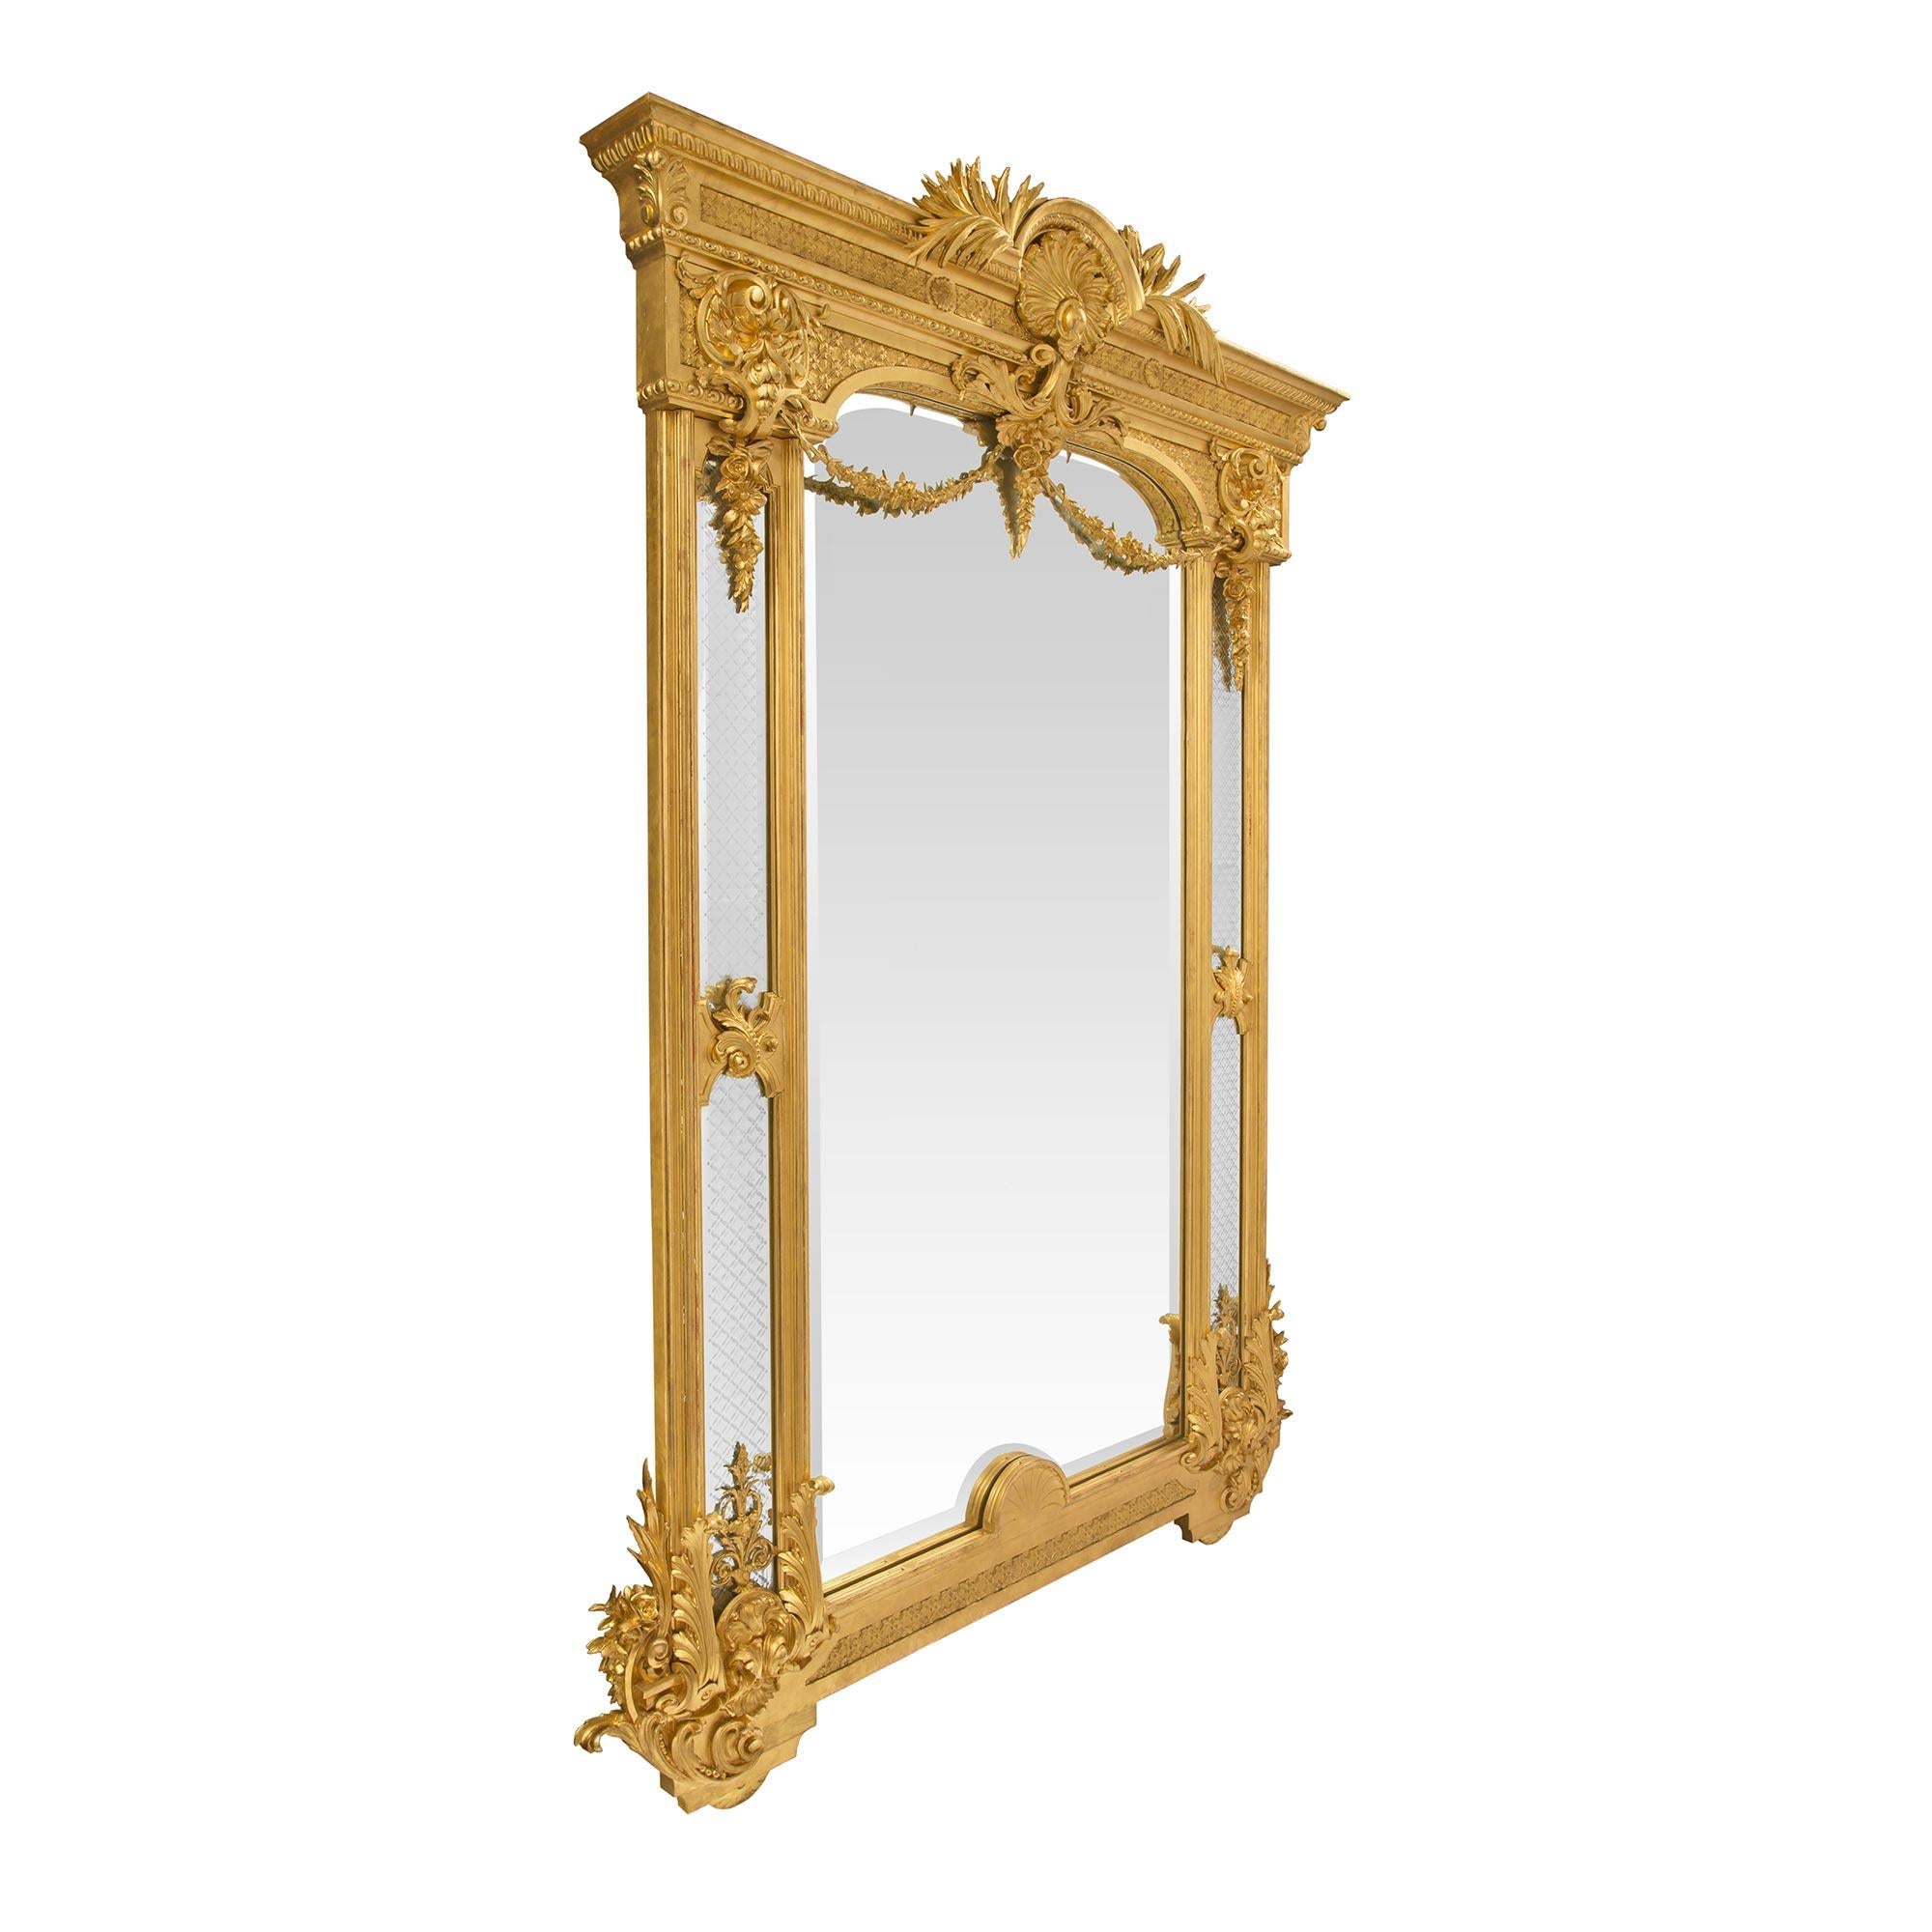 A stunning and monumental Italian 19th century Louis XVI style giltwood double framed mirror. The original central beveled mirror plate is framed within a fine mottled border and displays a beautiful bevel. With a striking recessed bottom carved